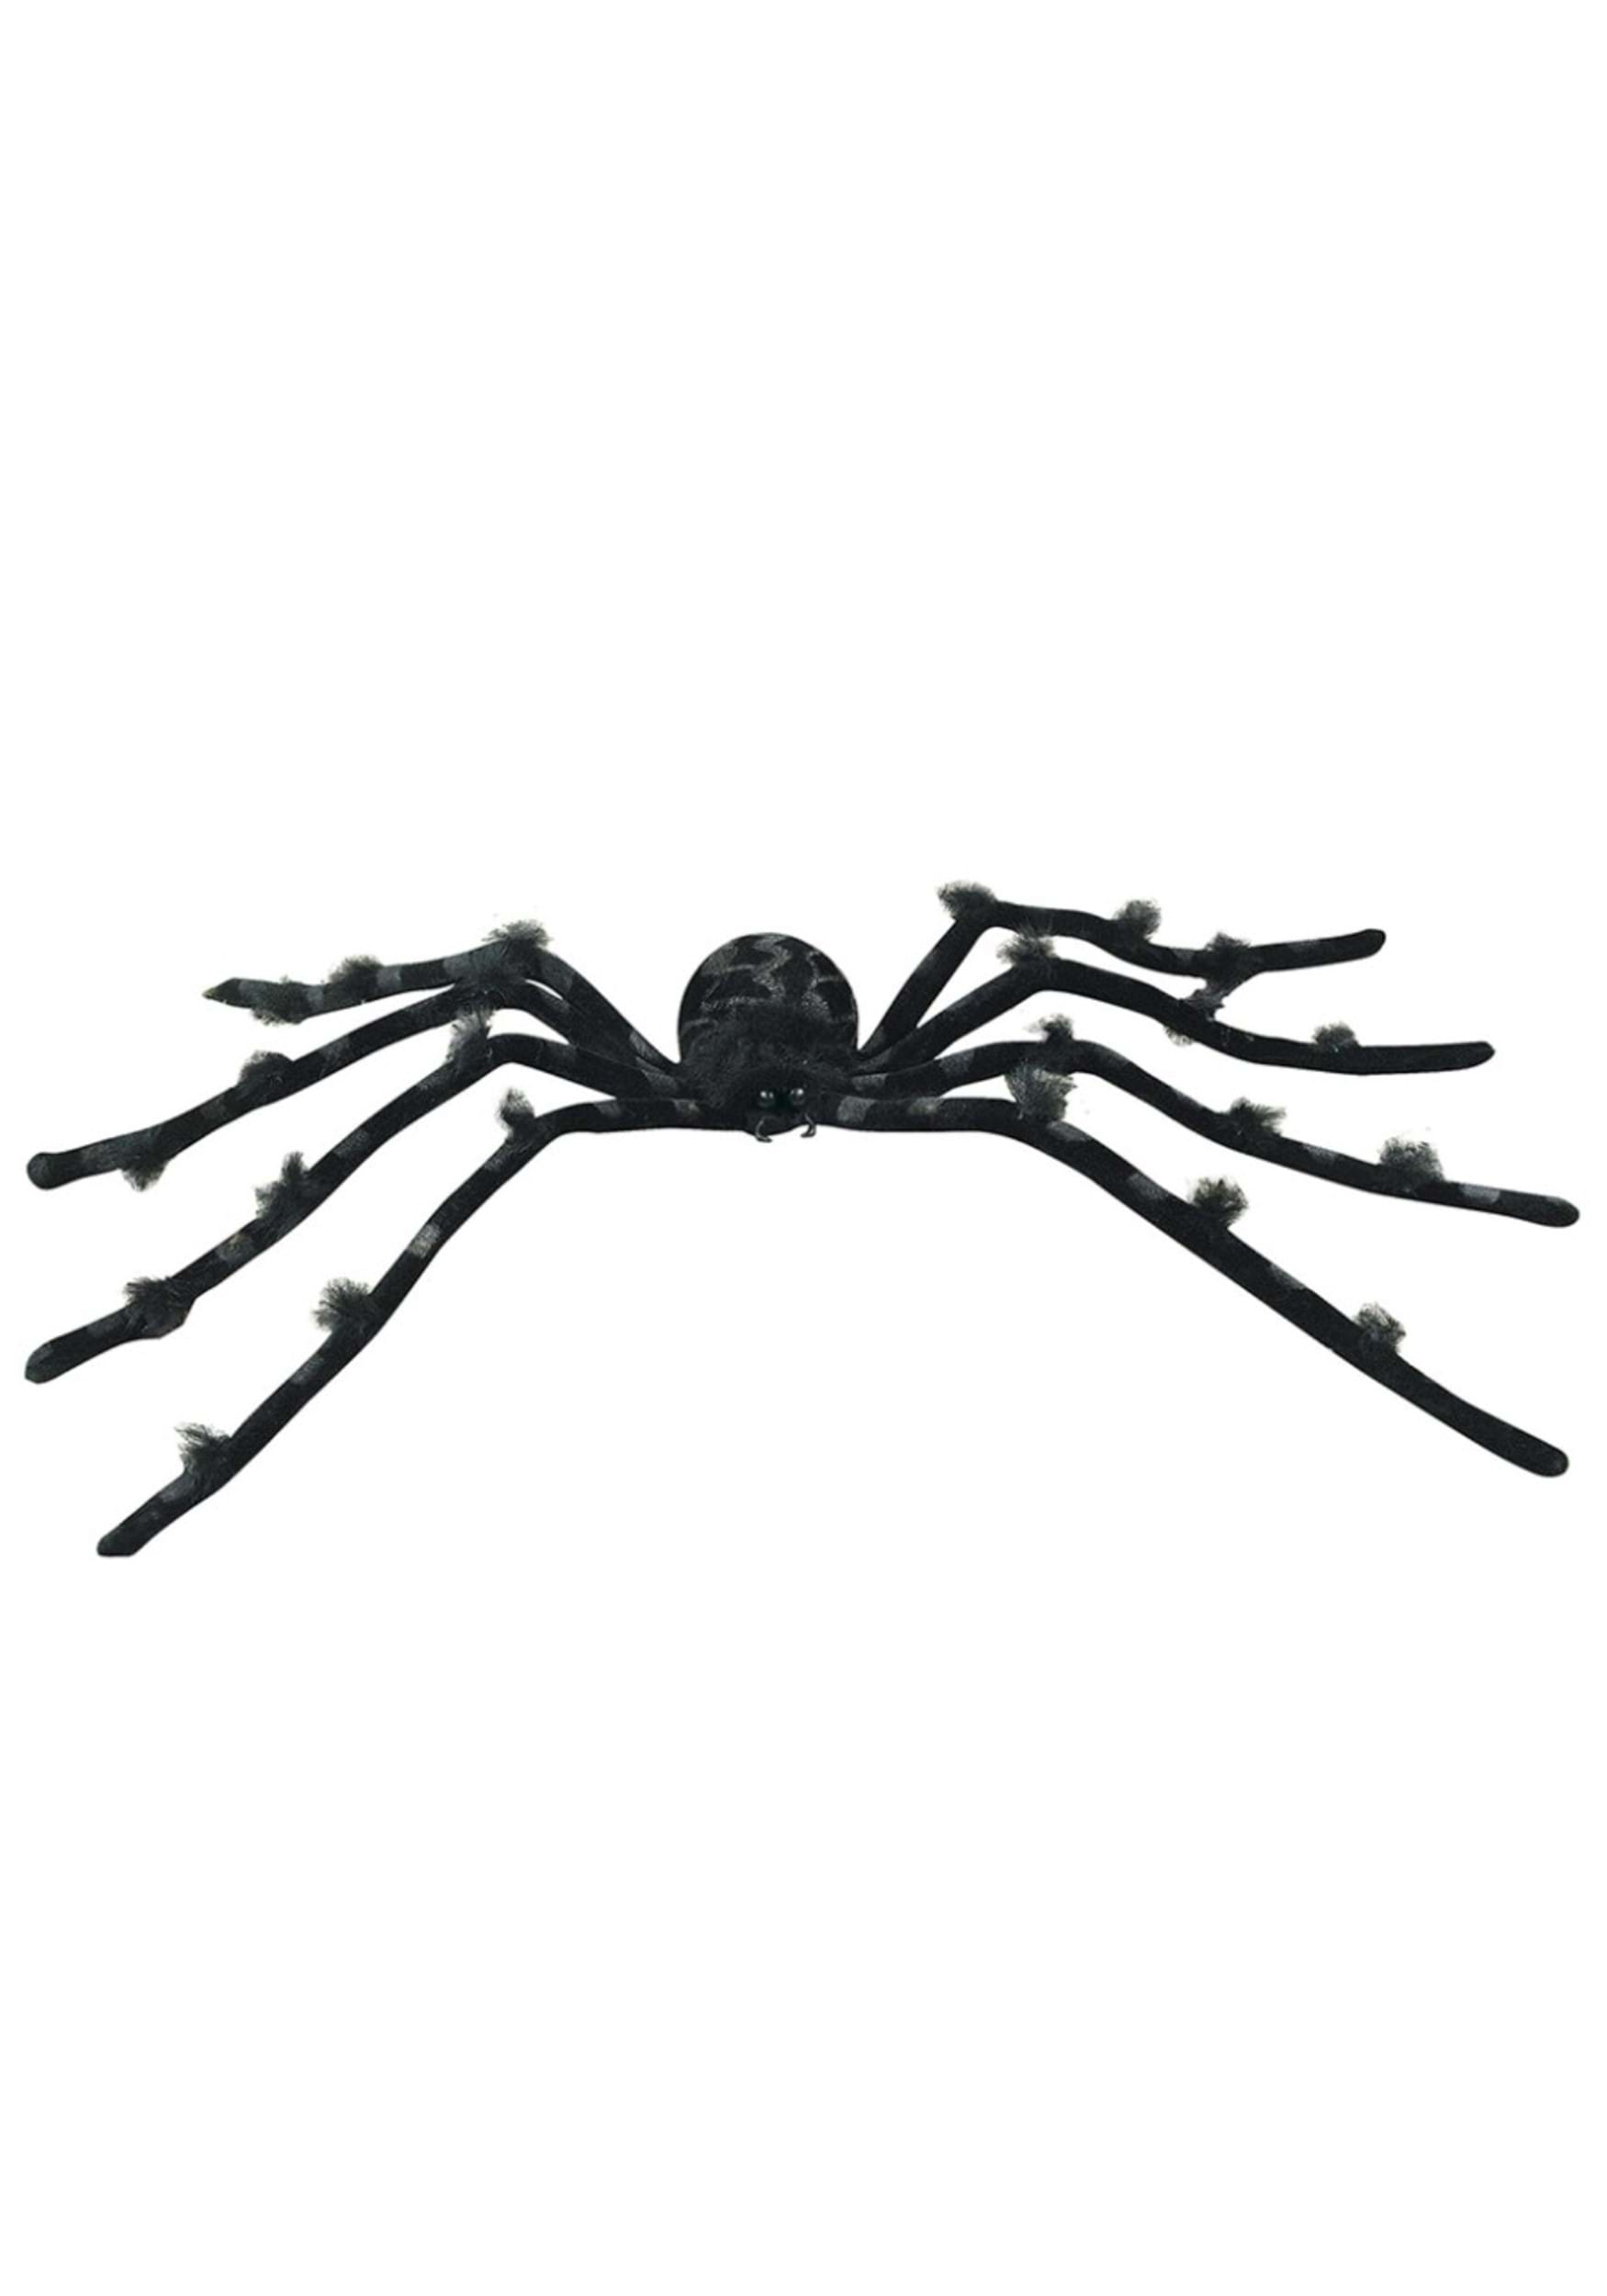 30 Inch Poseable Spider Prop